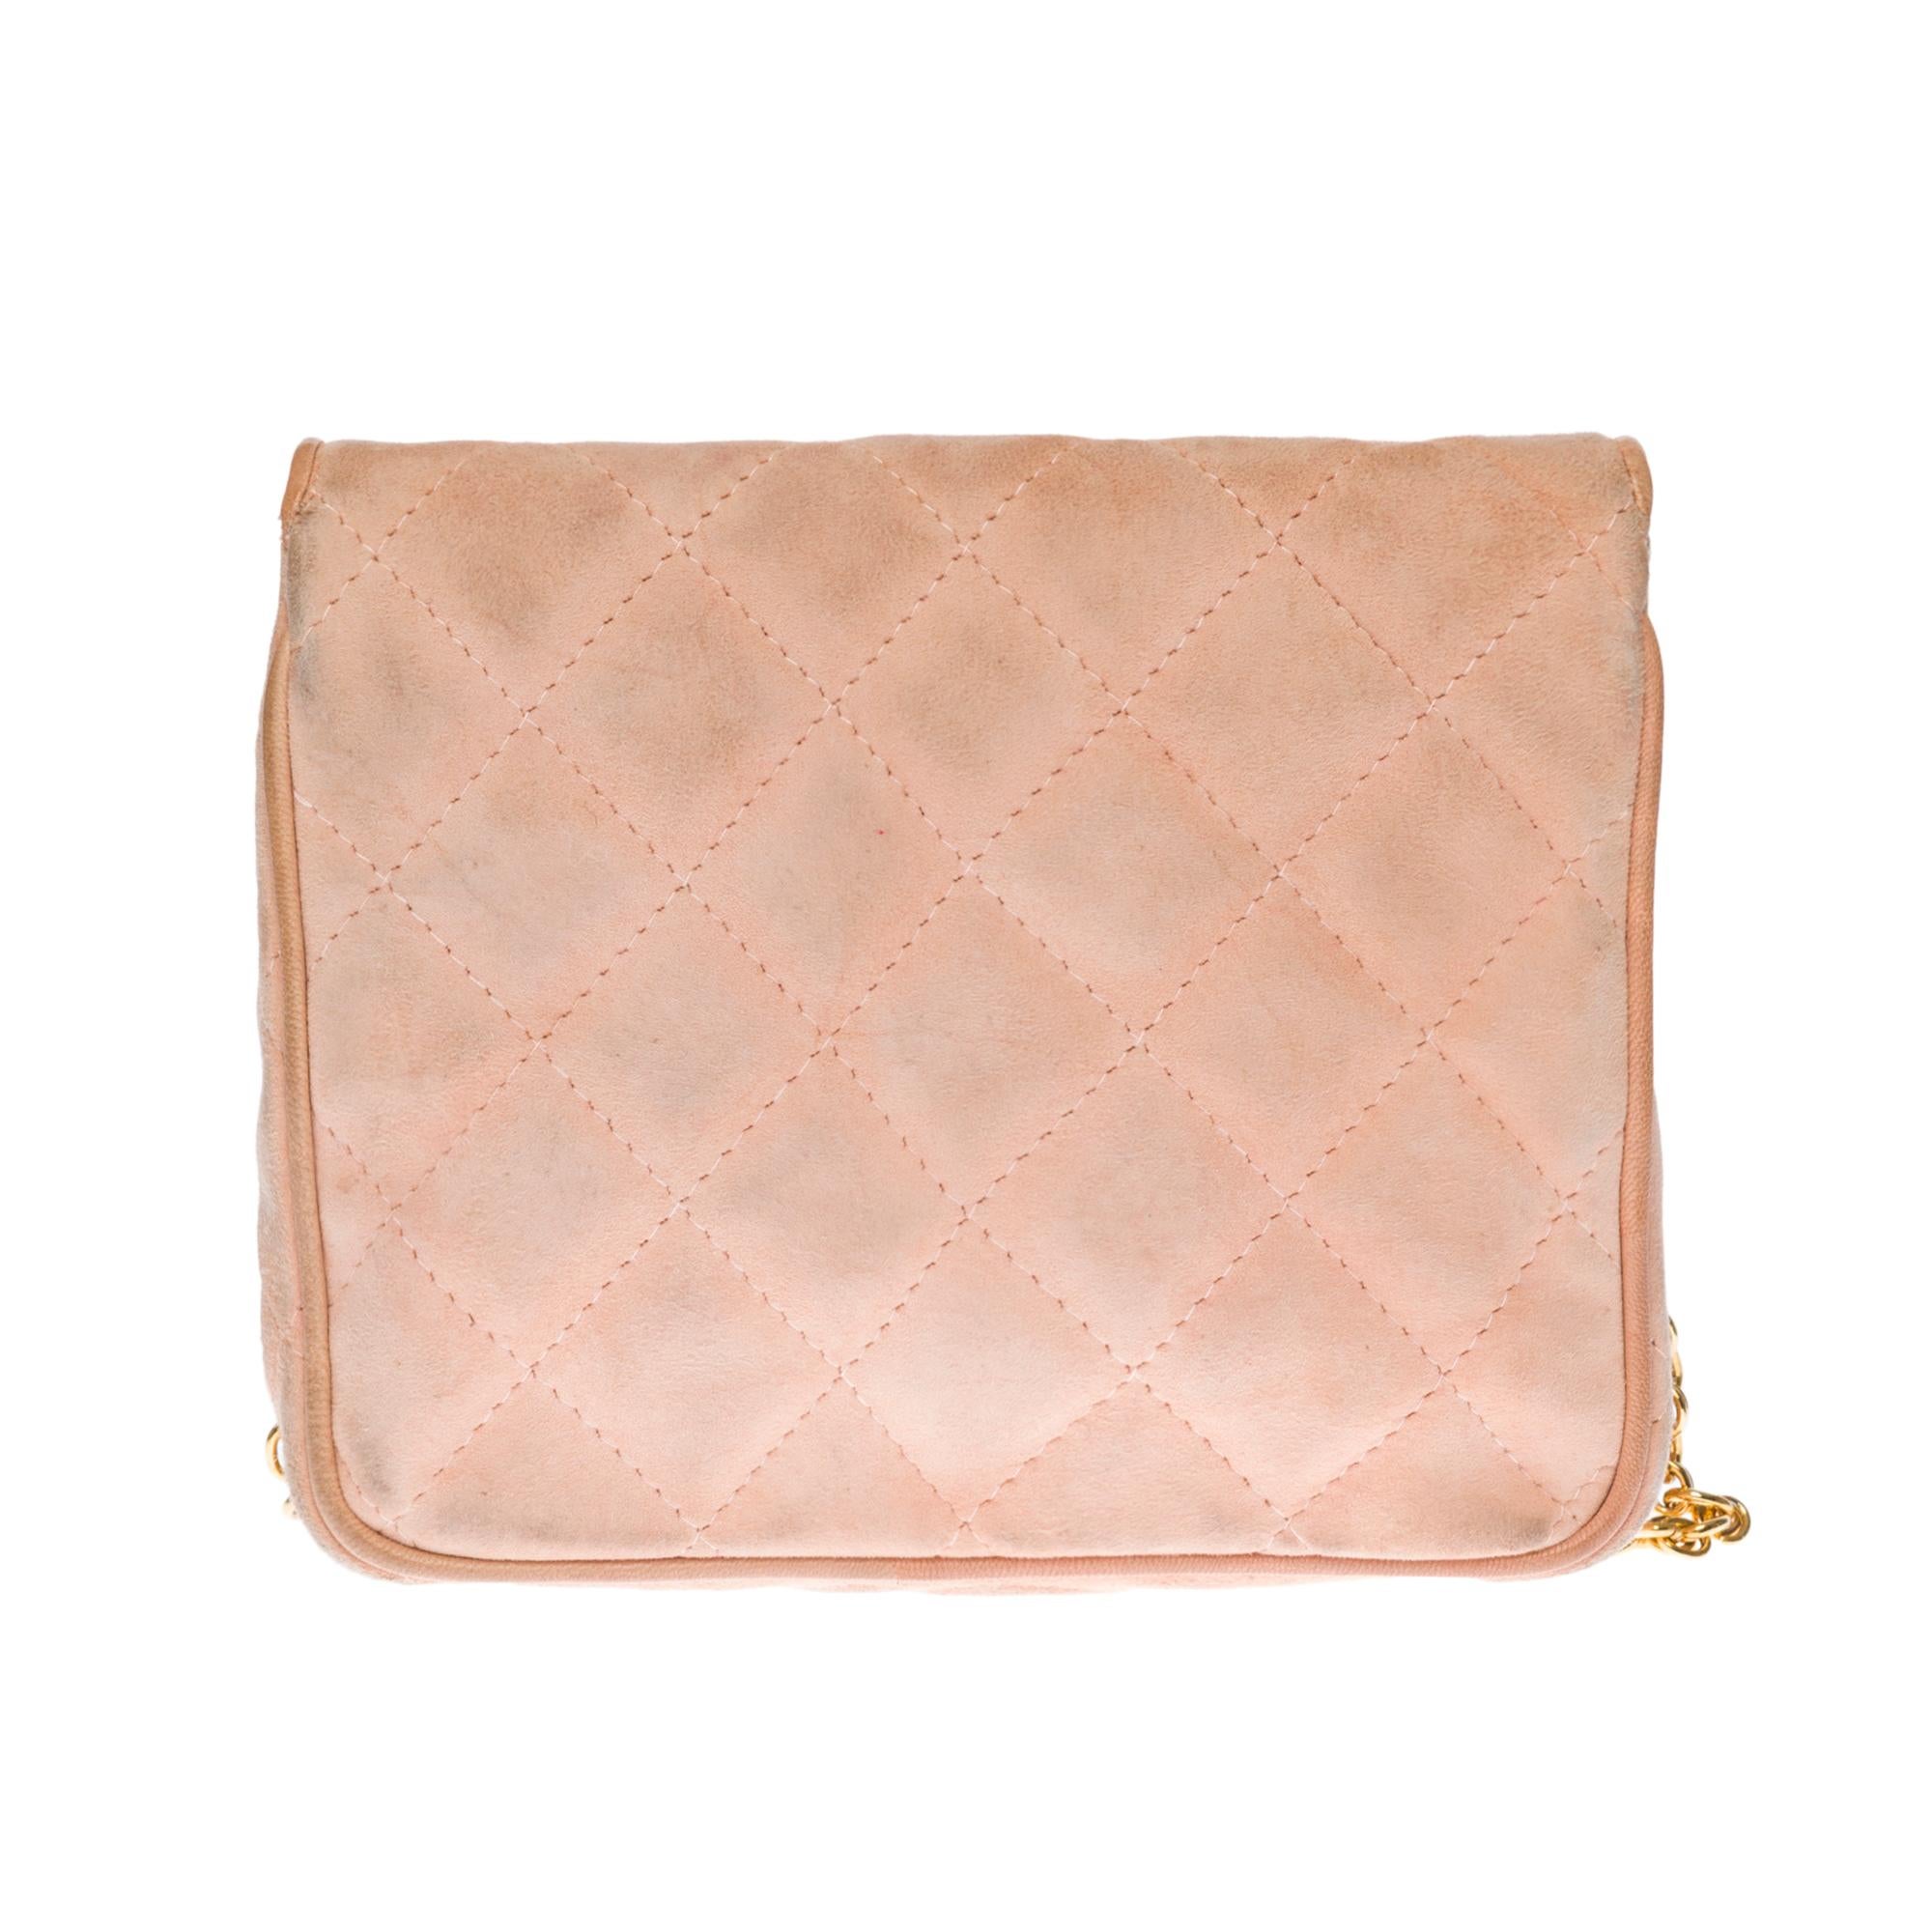 Lovely Chanel Classic Flap shoulder bag in pink quilted suede, gilded metal hardware, a chain handle in gilded metal allowing a shoulder support

Flap closure, snap closure
Beige leather lining, one zippered pocket
Signature: 